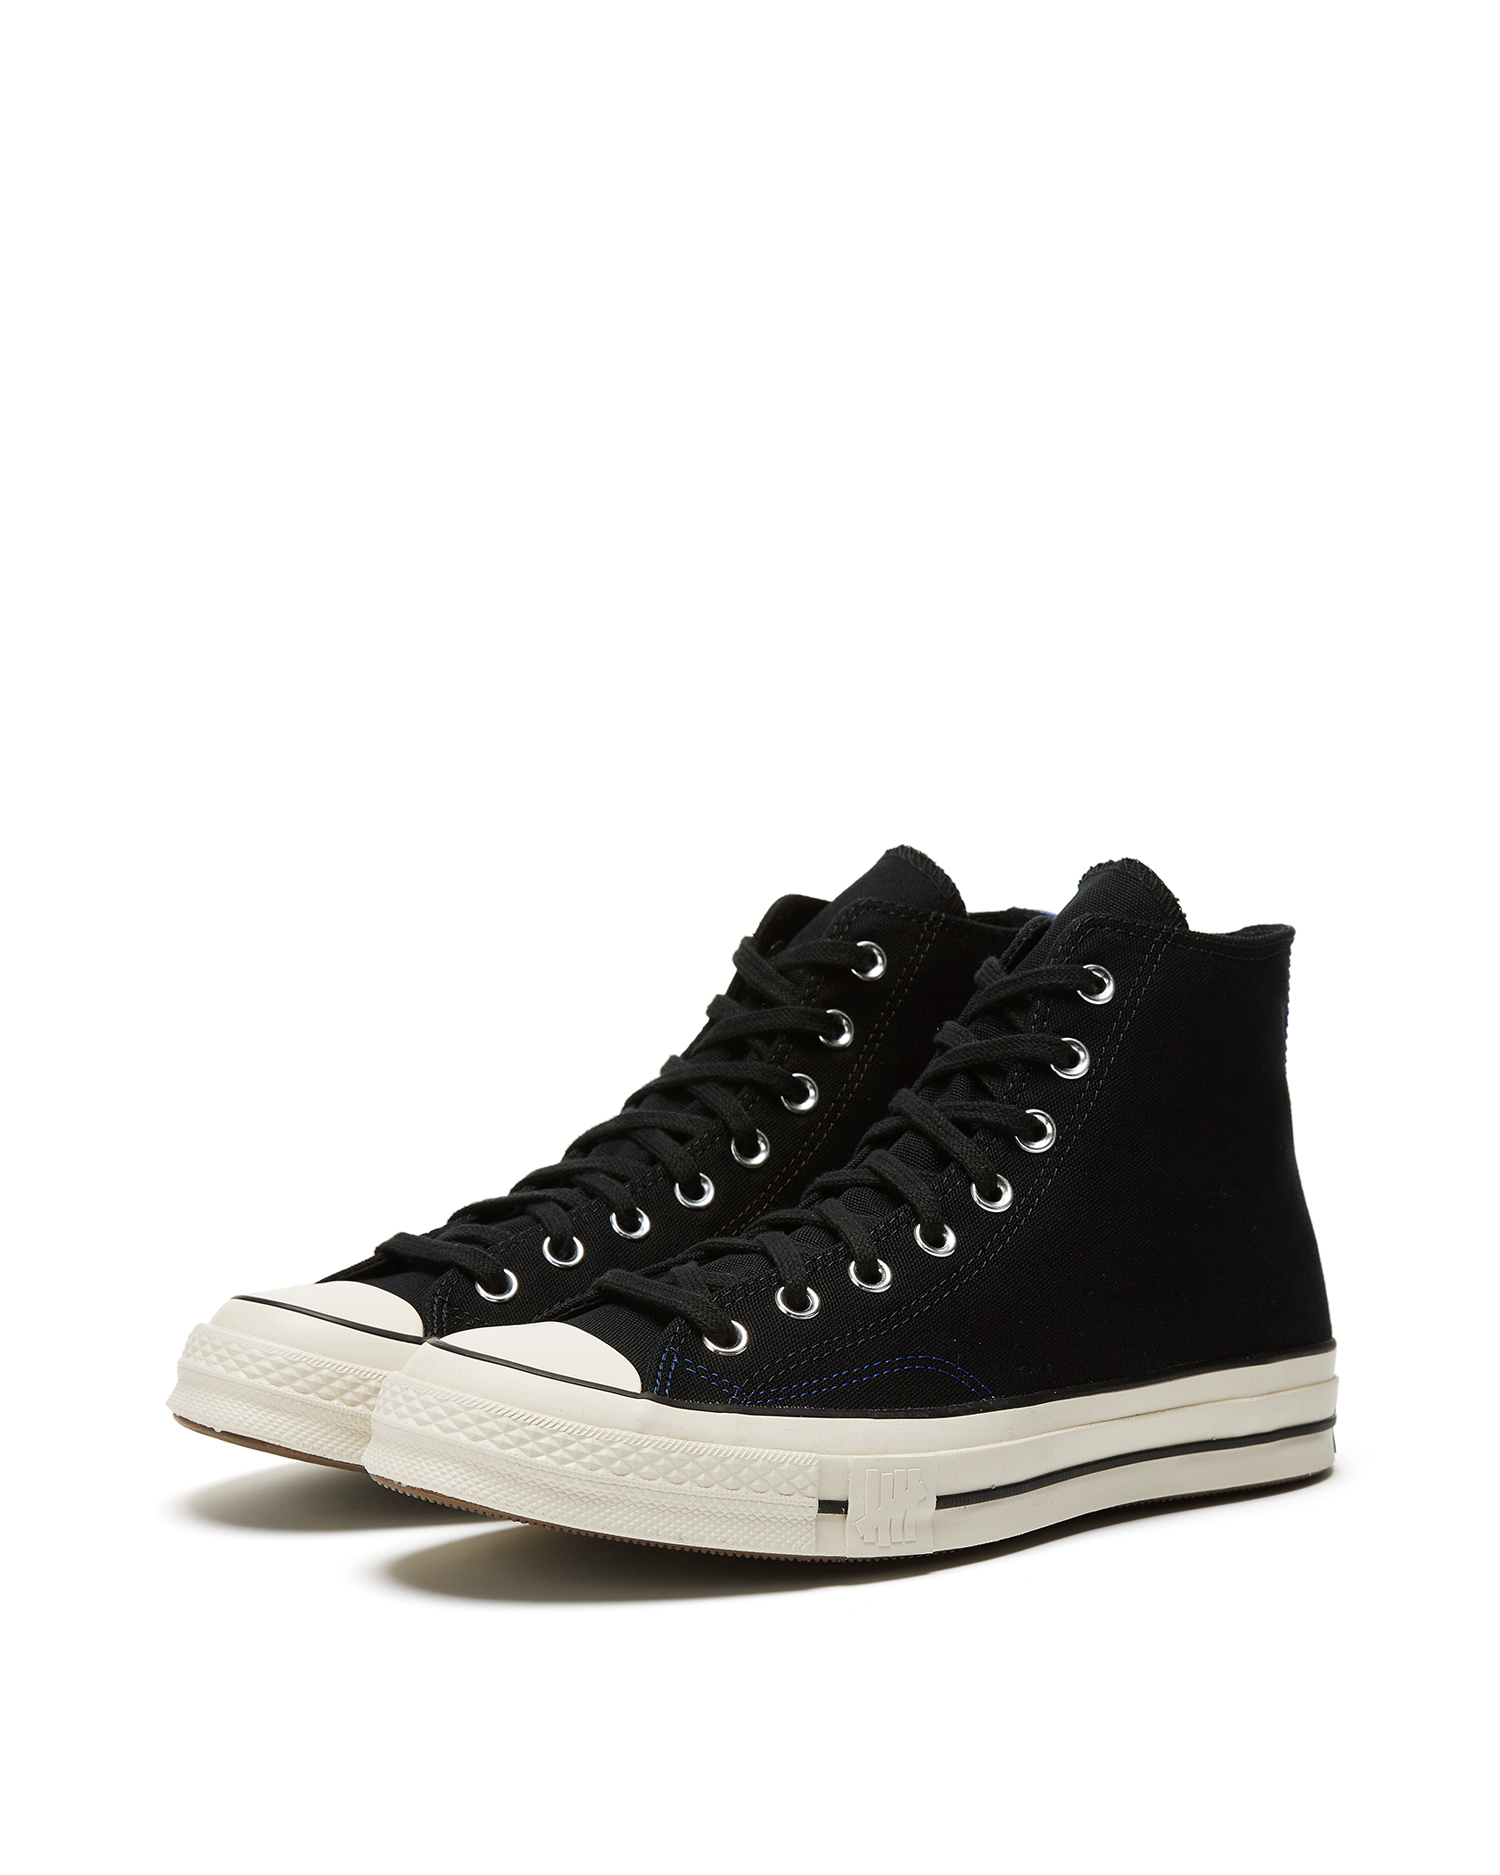 CONVERSE X Undefeated Chuck 70 Hi sneakers